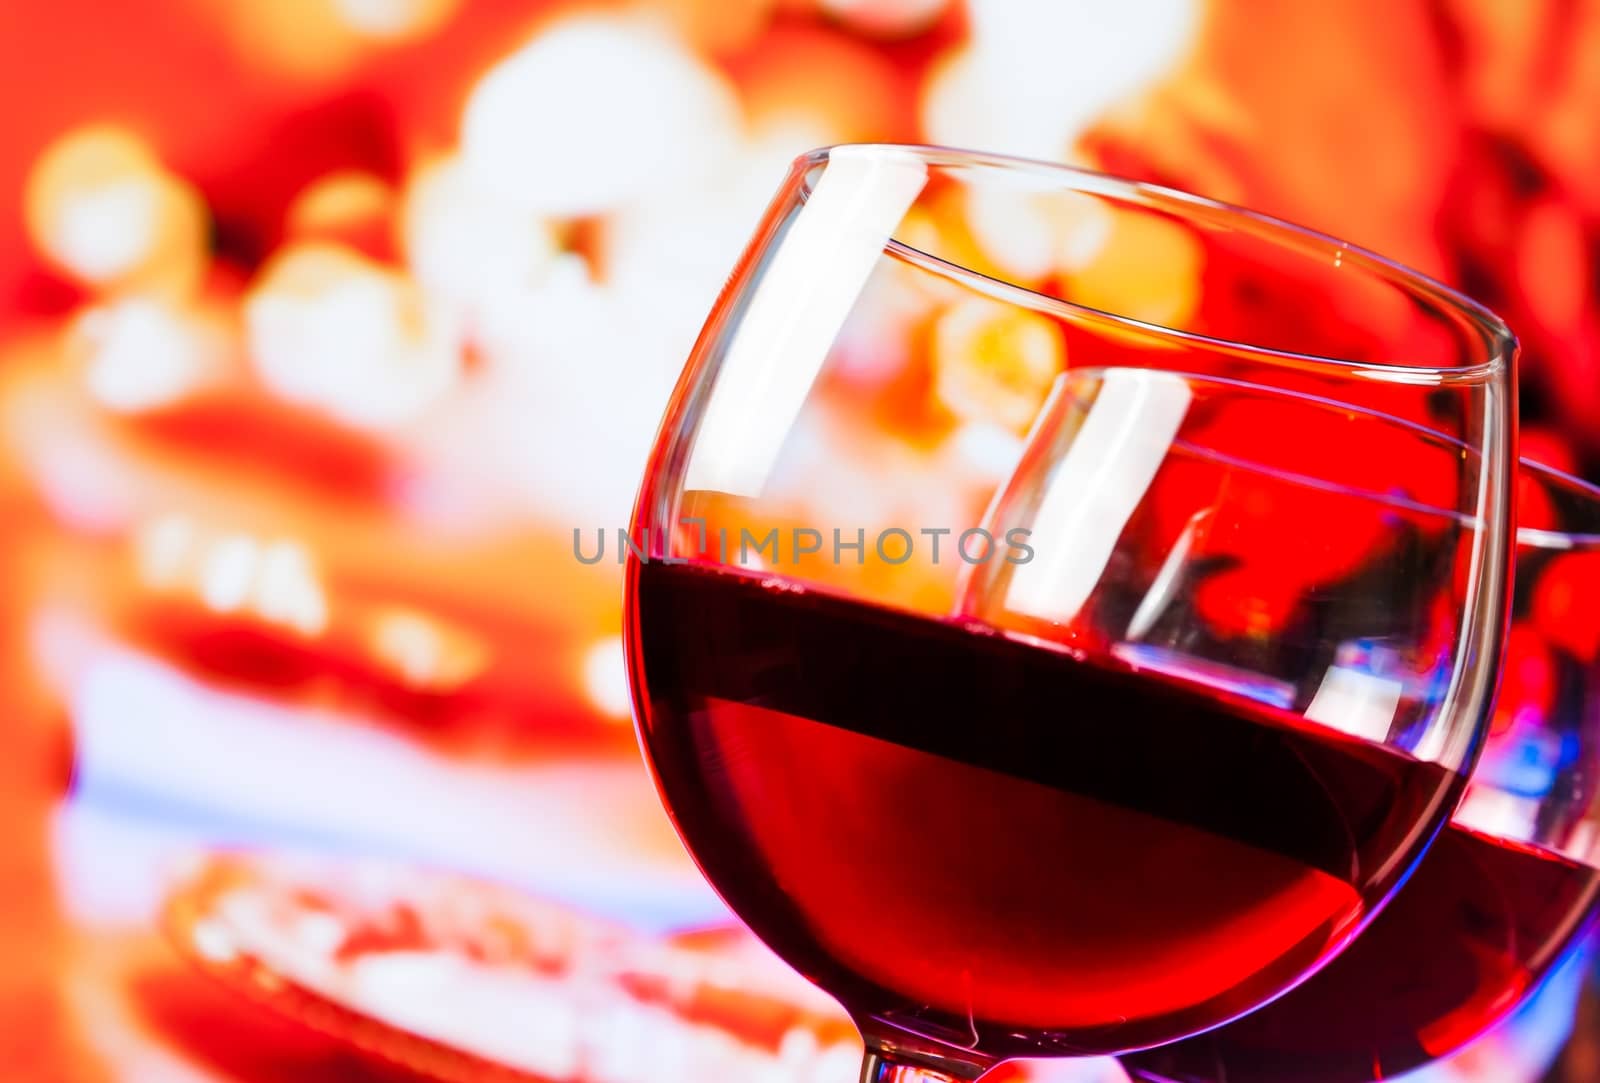 detail of red wine glasses against unfocused restaurant table background, festive and fun concept